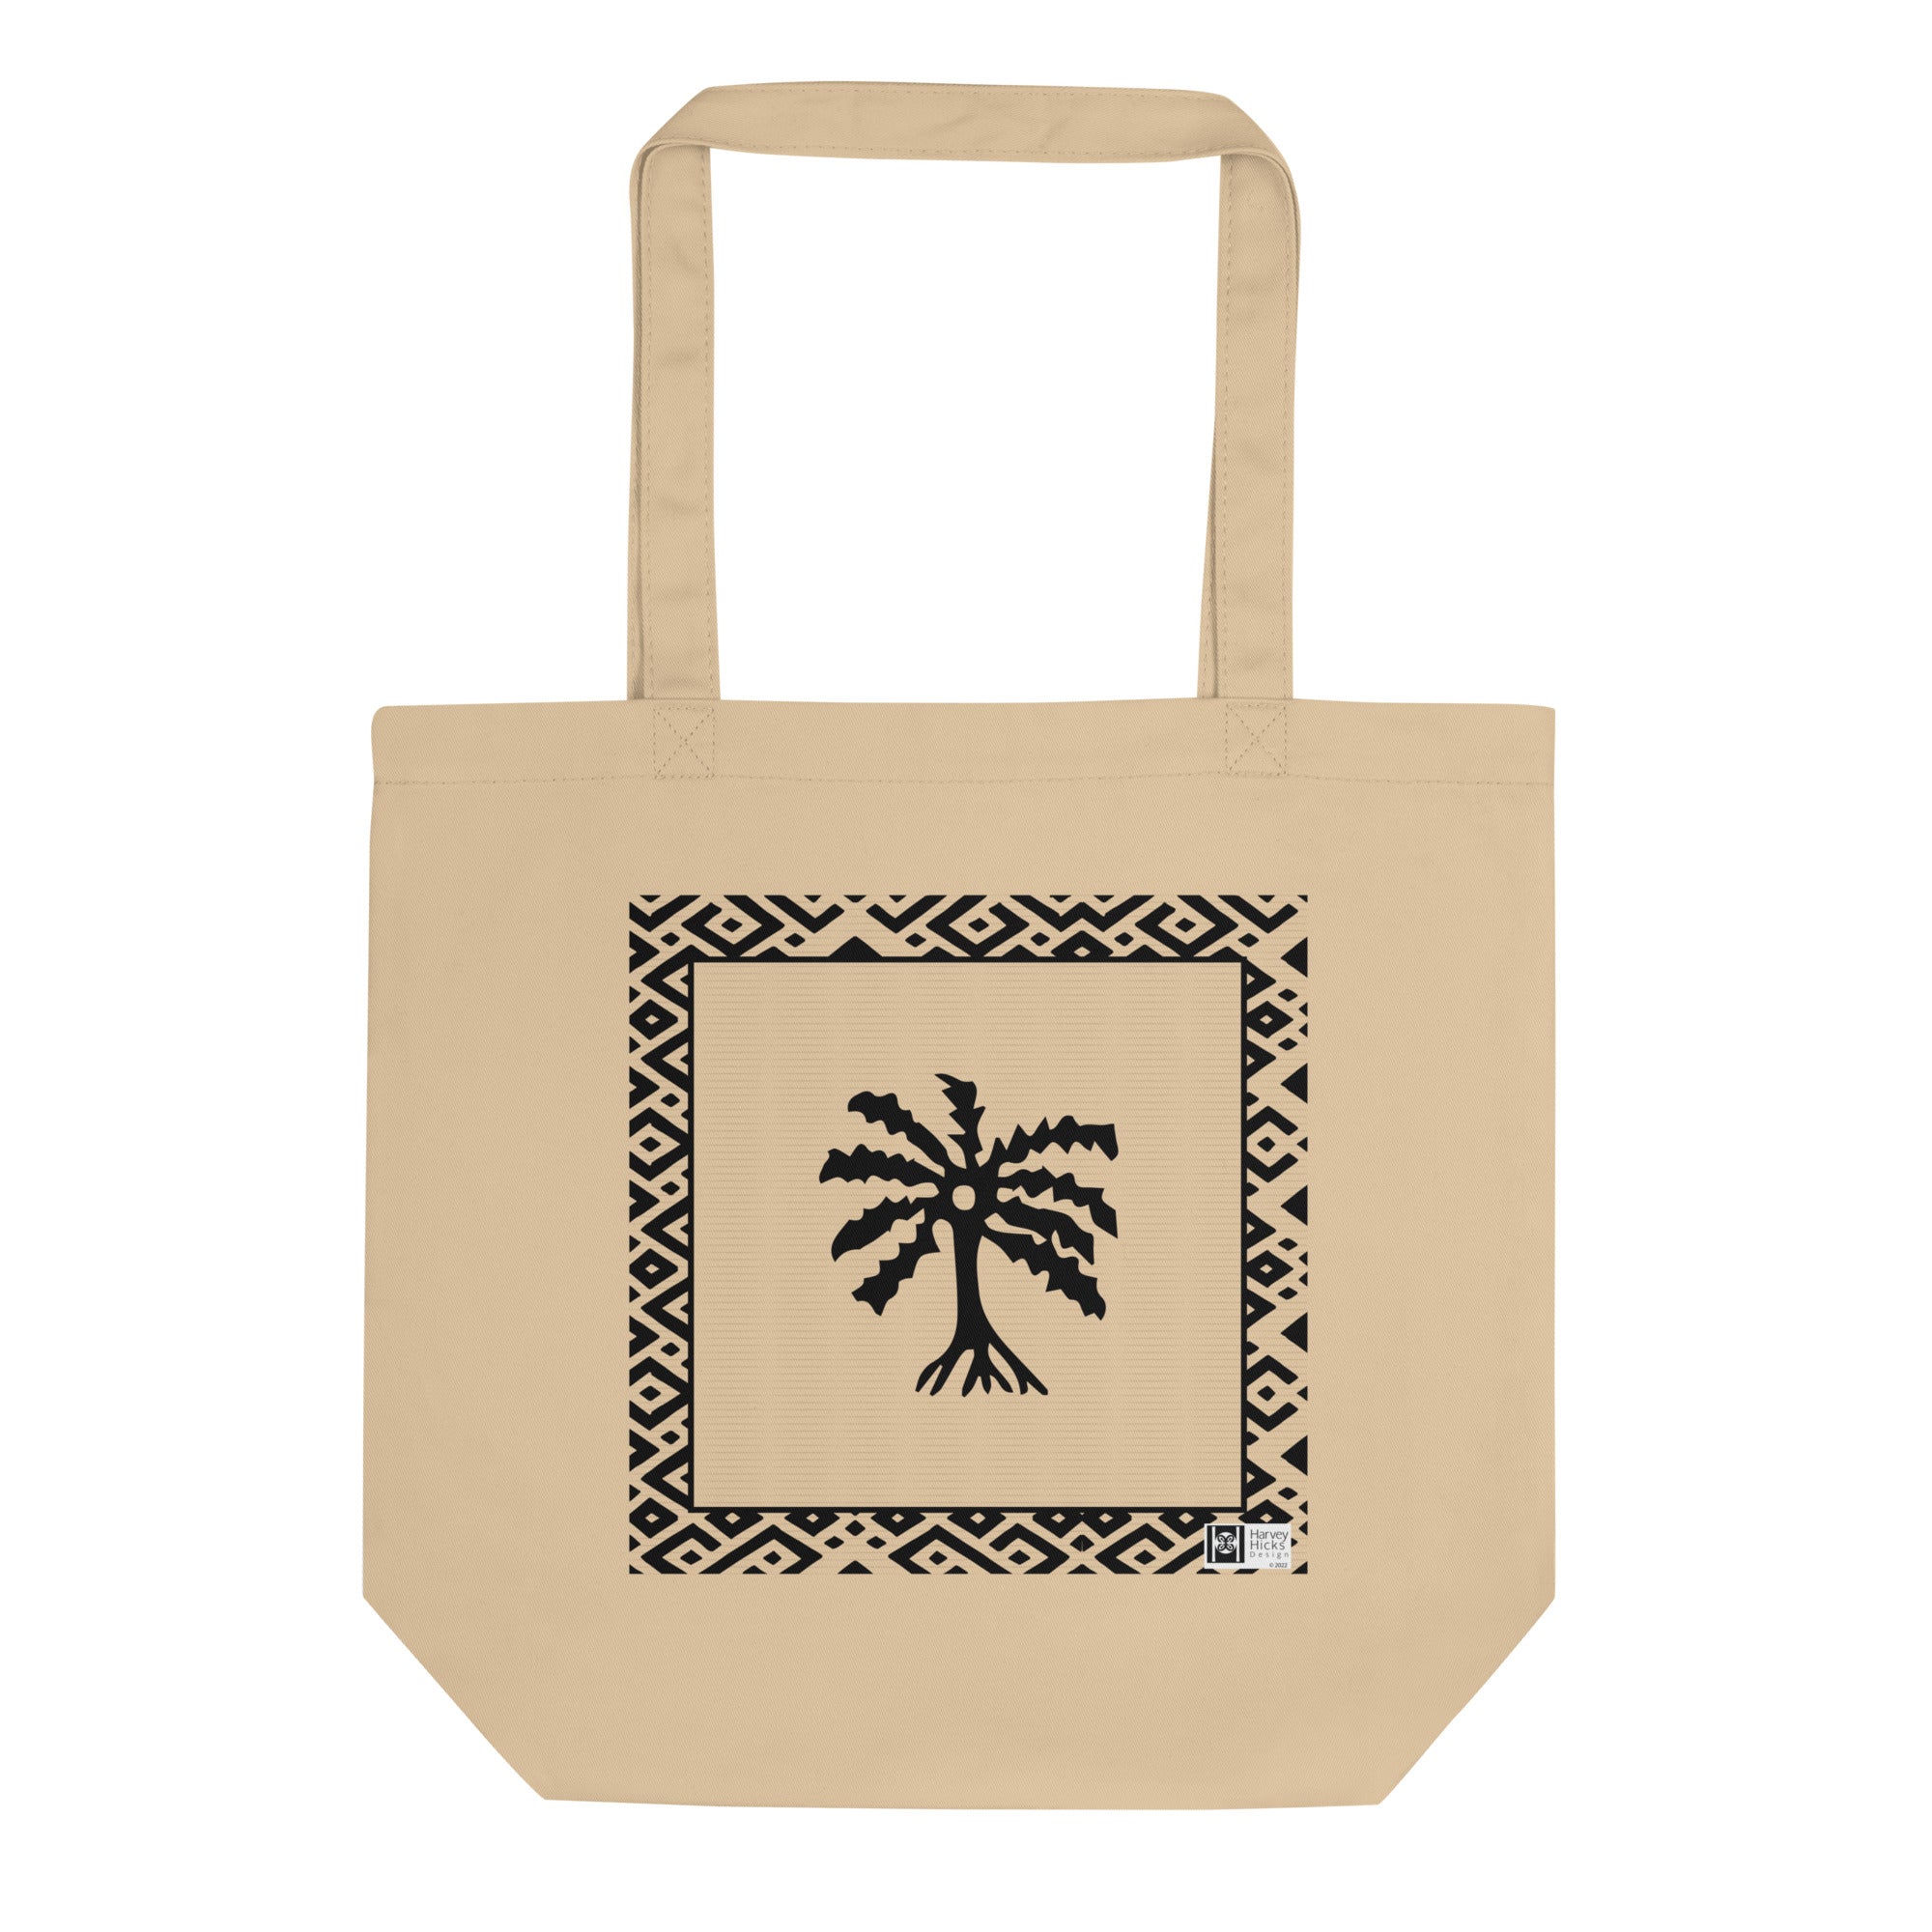 100% cotton Eco Tote Bag, featuring the Adinkra symbol for resourcefulness, NO TEXT